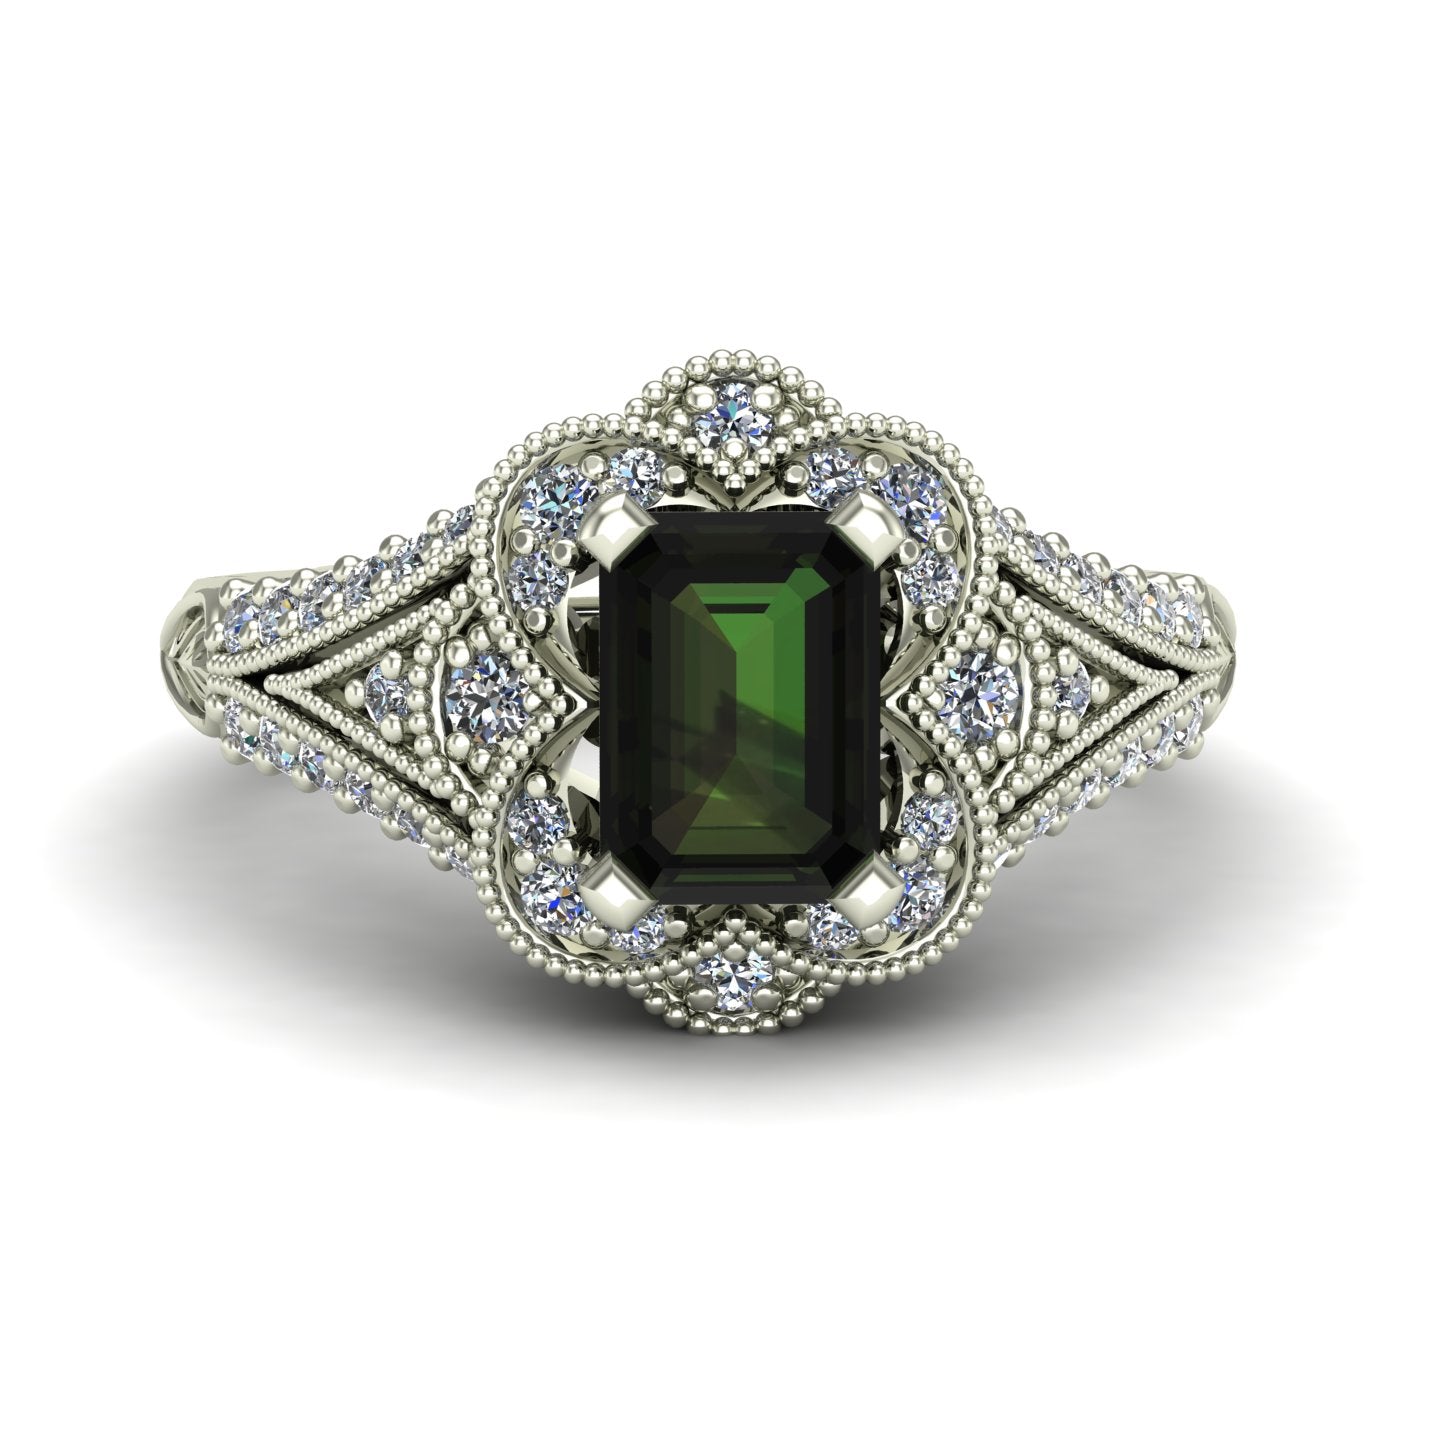 emerald cut green tourmaline and diamond scallop halo ring in 14k white gold - Charles Babb Designs - top view